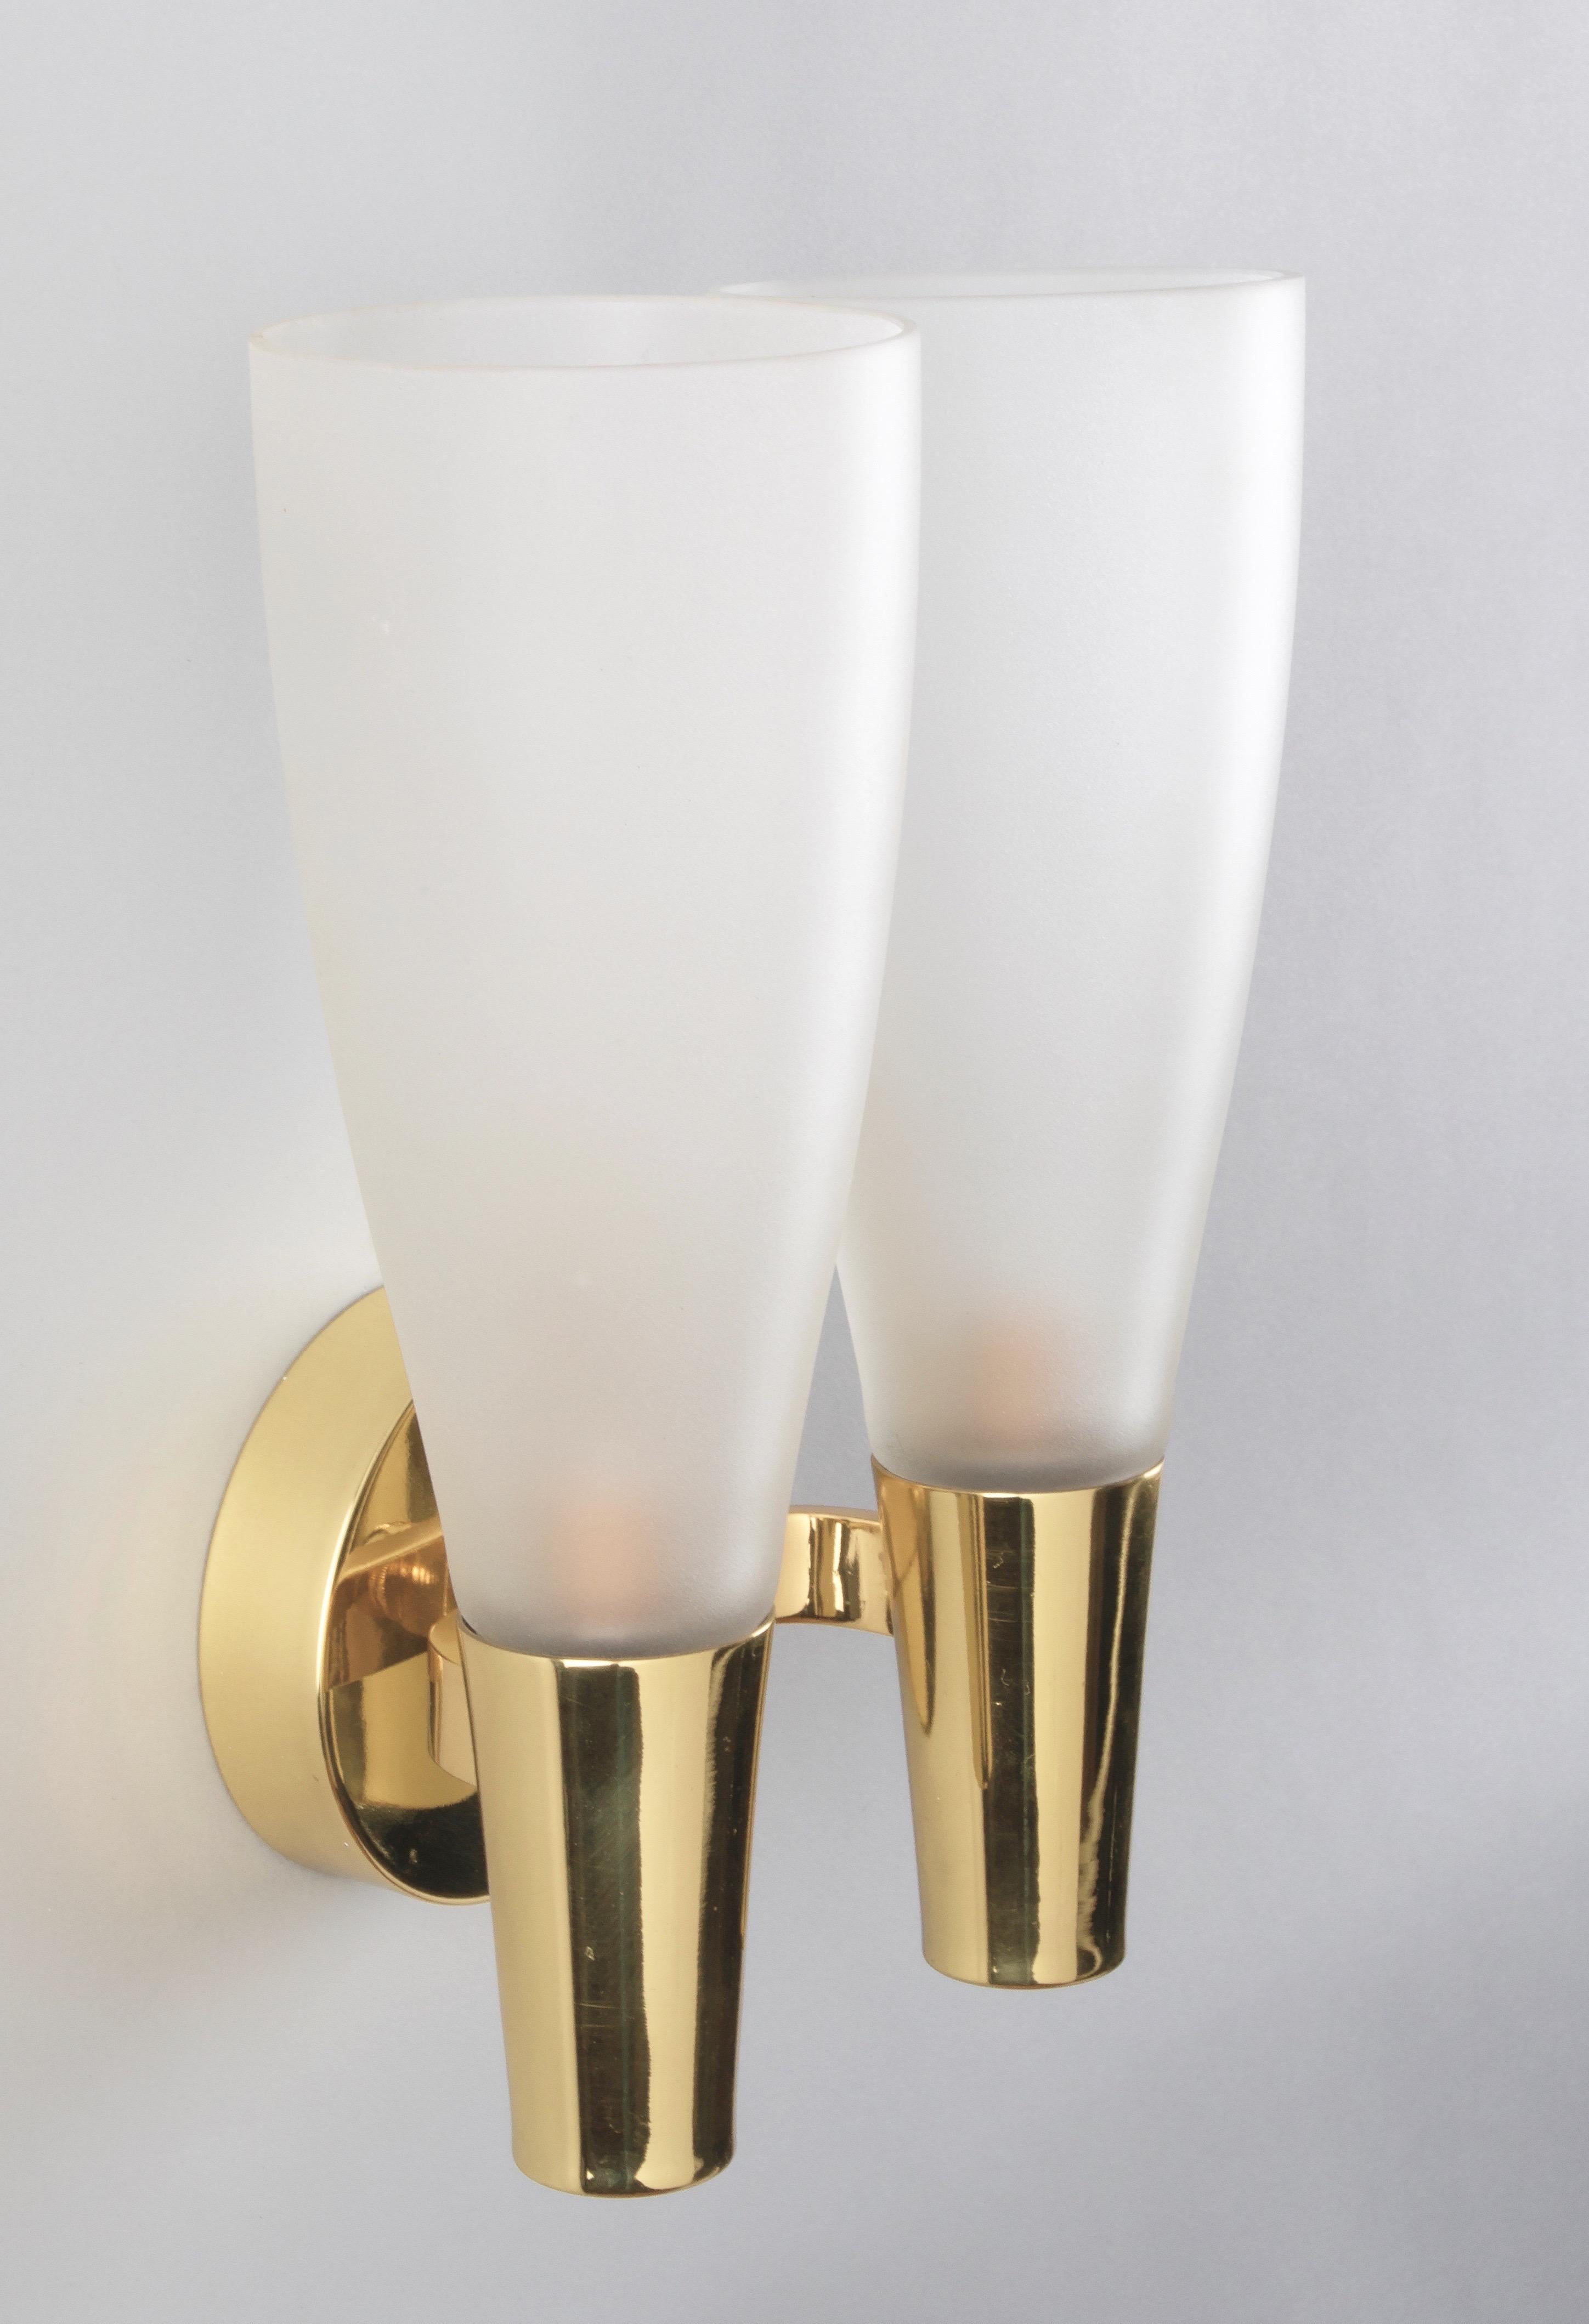 Mid-20th Century Pietro Chiesa for Fontana Arte Brass Sconces with Two Glass Shades, Italy 1940s